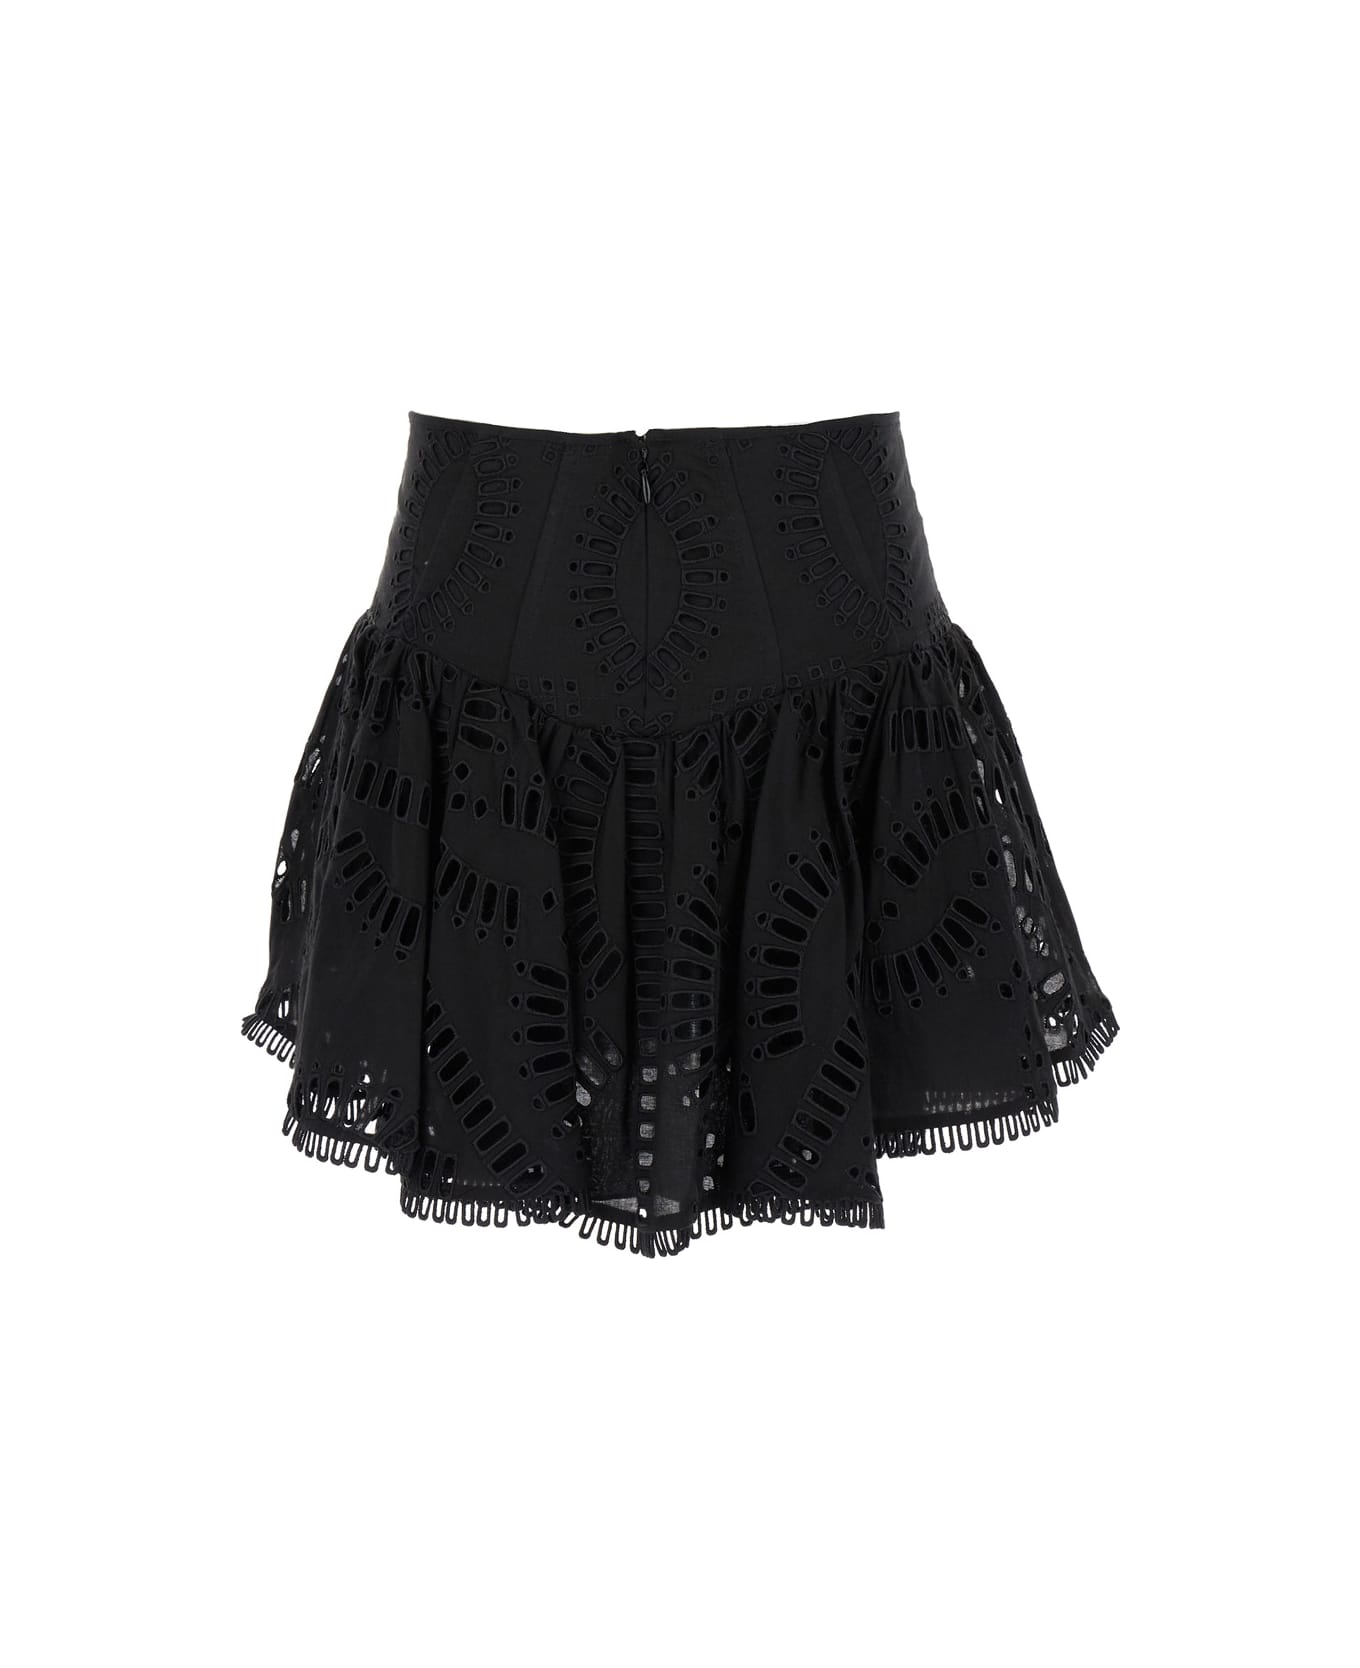 Charo Ruiz Black High Waisted 'favik' Miniskirt With Embroidery In Cotton Blend Woman - Black スカート